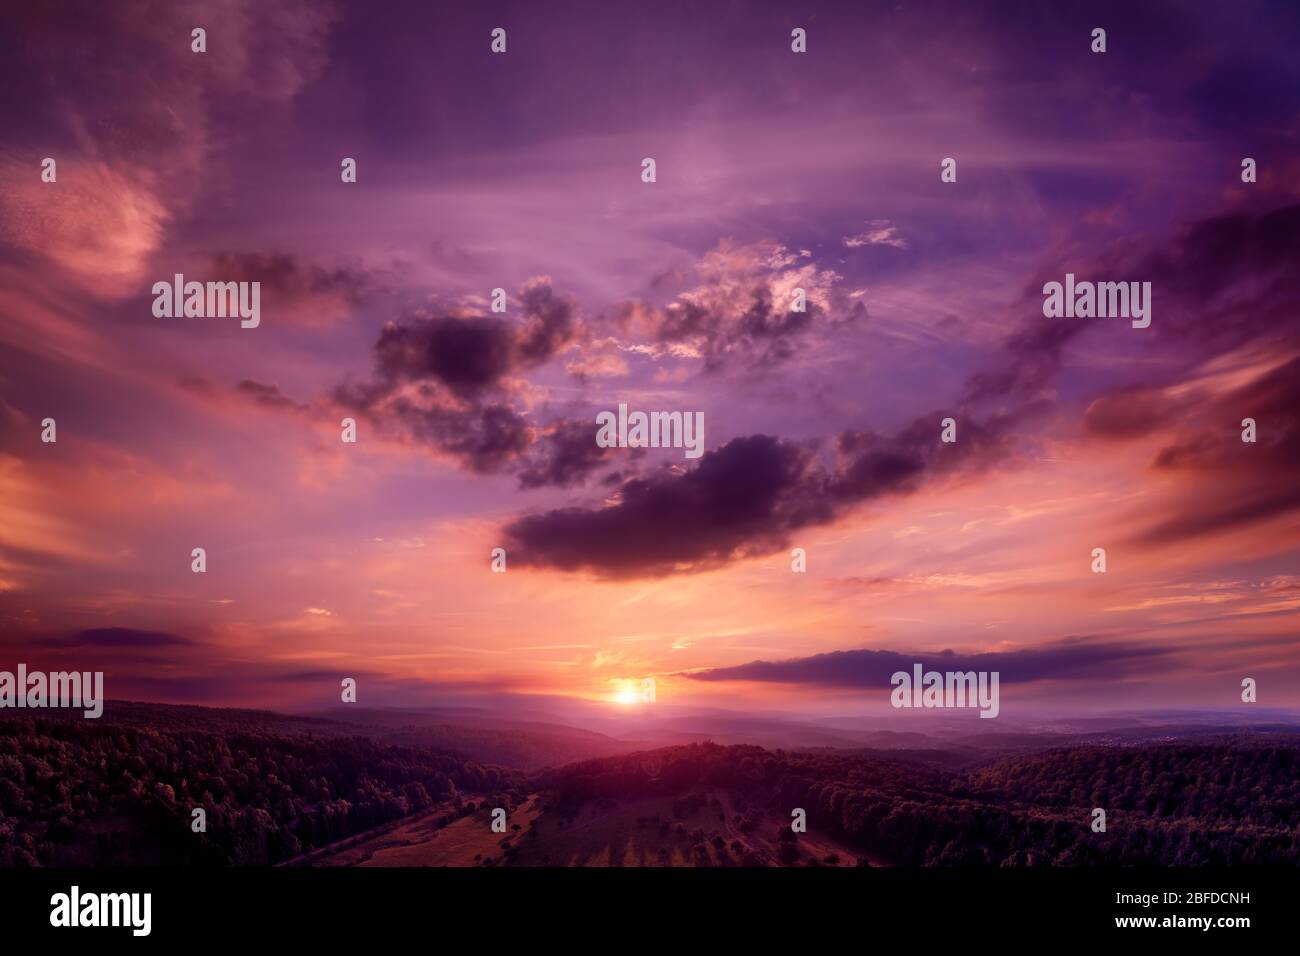 Dramatic, emotional and romantic sunset sky in dark gorgeous red and purple colors Stock Photo